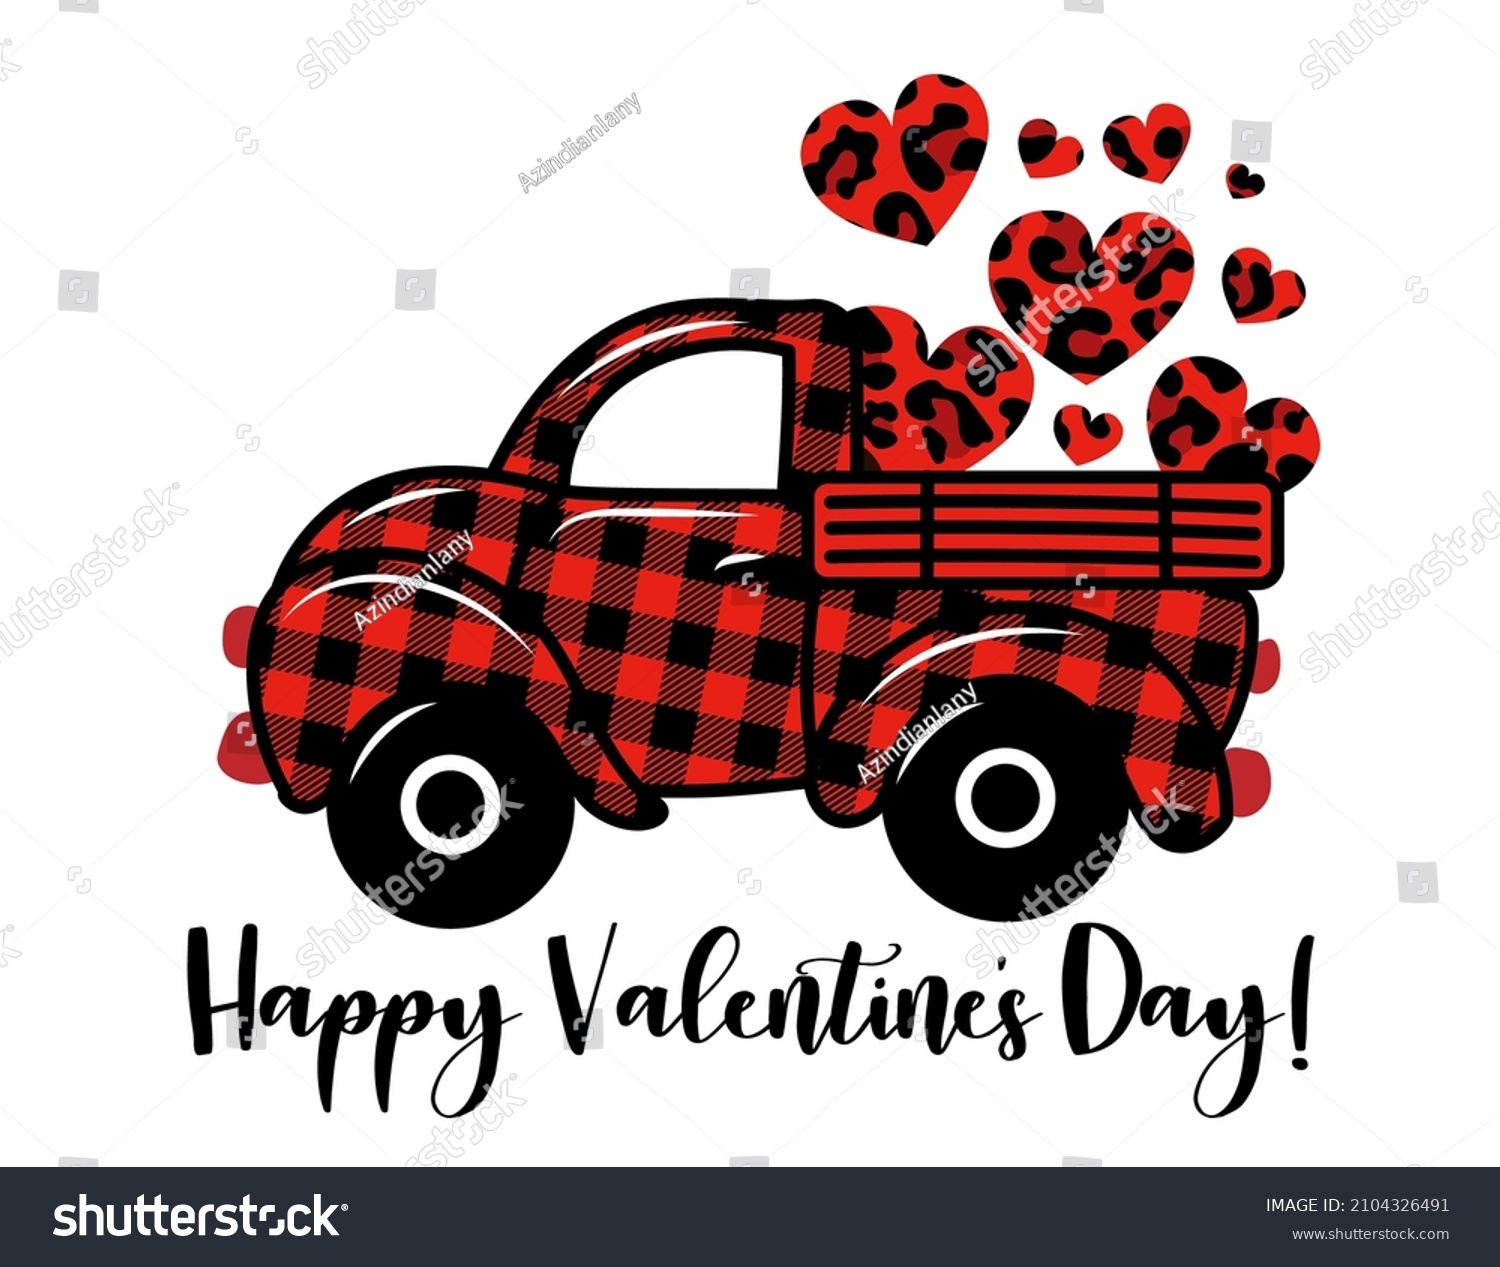 SVG of Happy Valentines Day! - Calligraphy phrase for Valentine's Day. Lettering for Love greeting cards, invitations. Good for t-shirt, mug, gift, printing press. Buffalo plaid pickup carry leopard hearts. svg